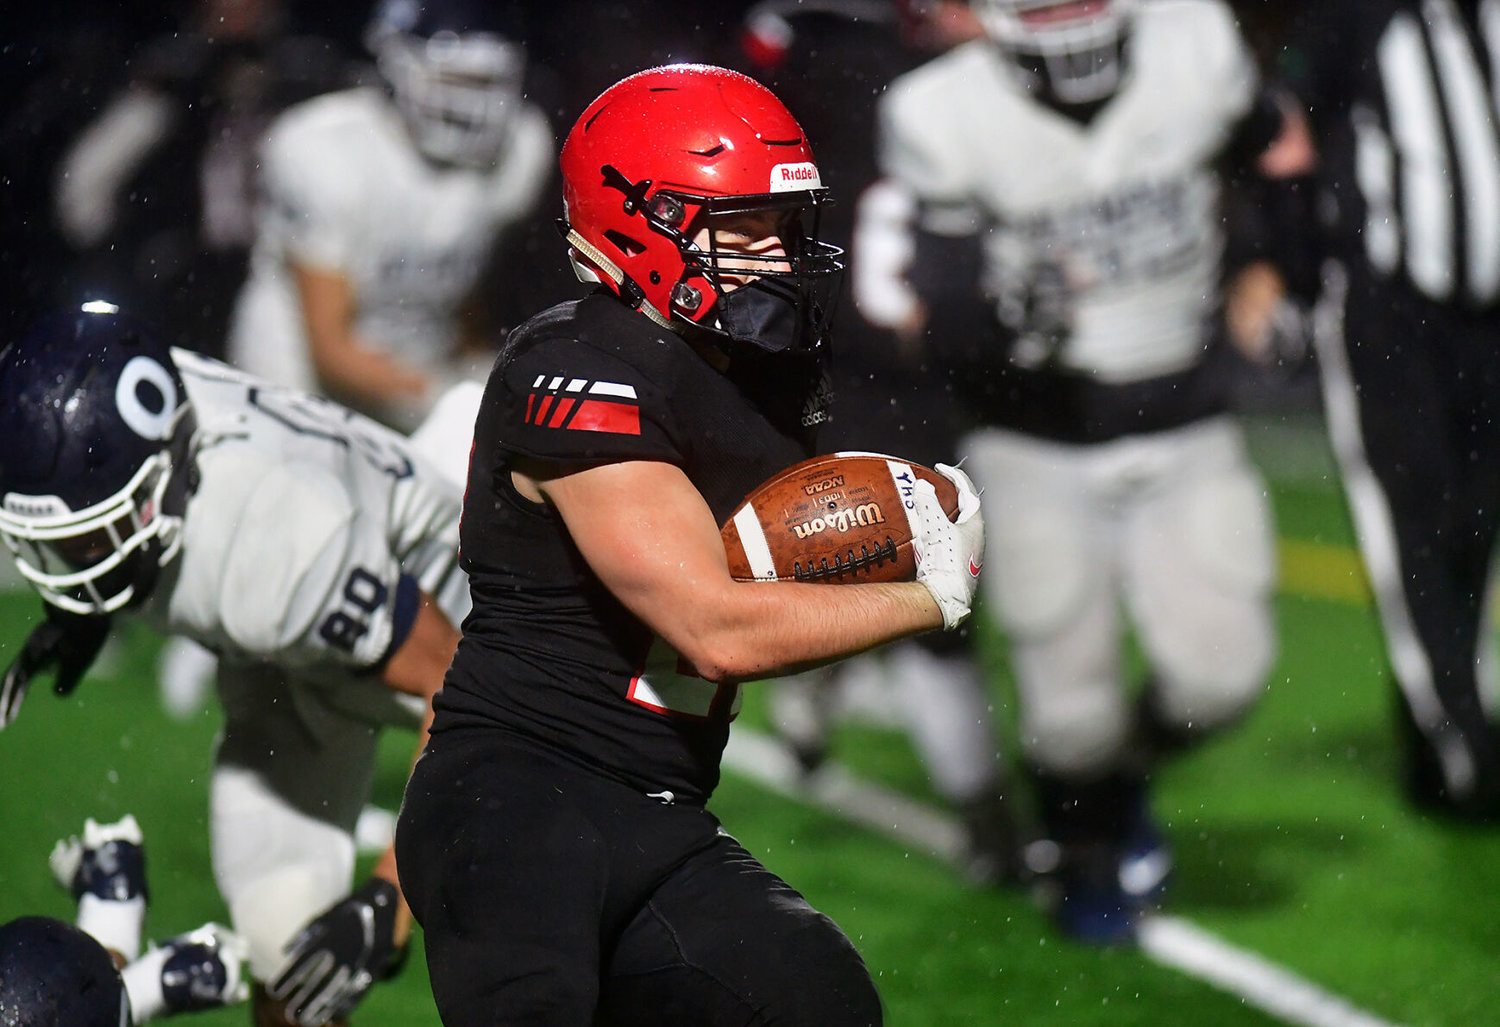 Yelm High School running back Sean Rohwedder busts loose for a big gain against Olympia High School on Friday, Feb. 19 as the Tornadoes began their shortened season by whipping the Bears 31-7 at the YHS stadium.